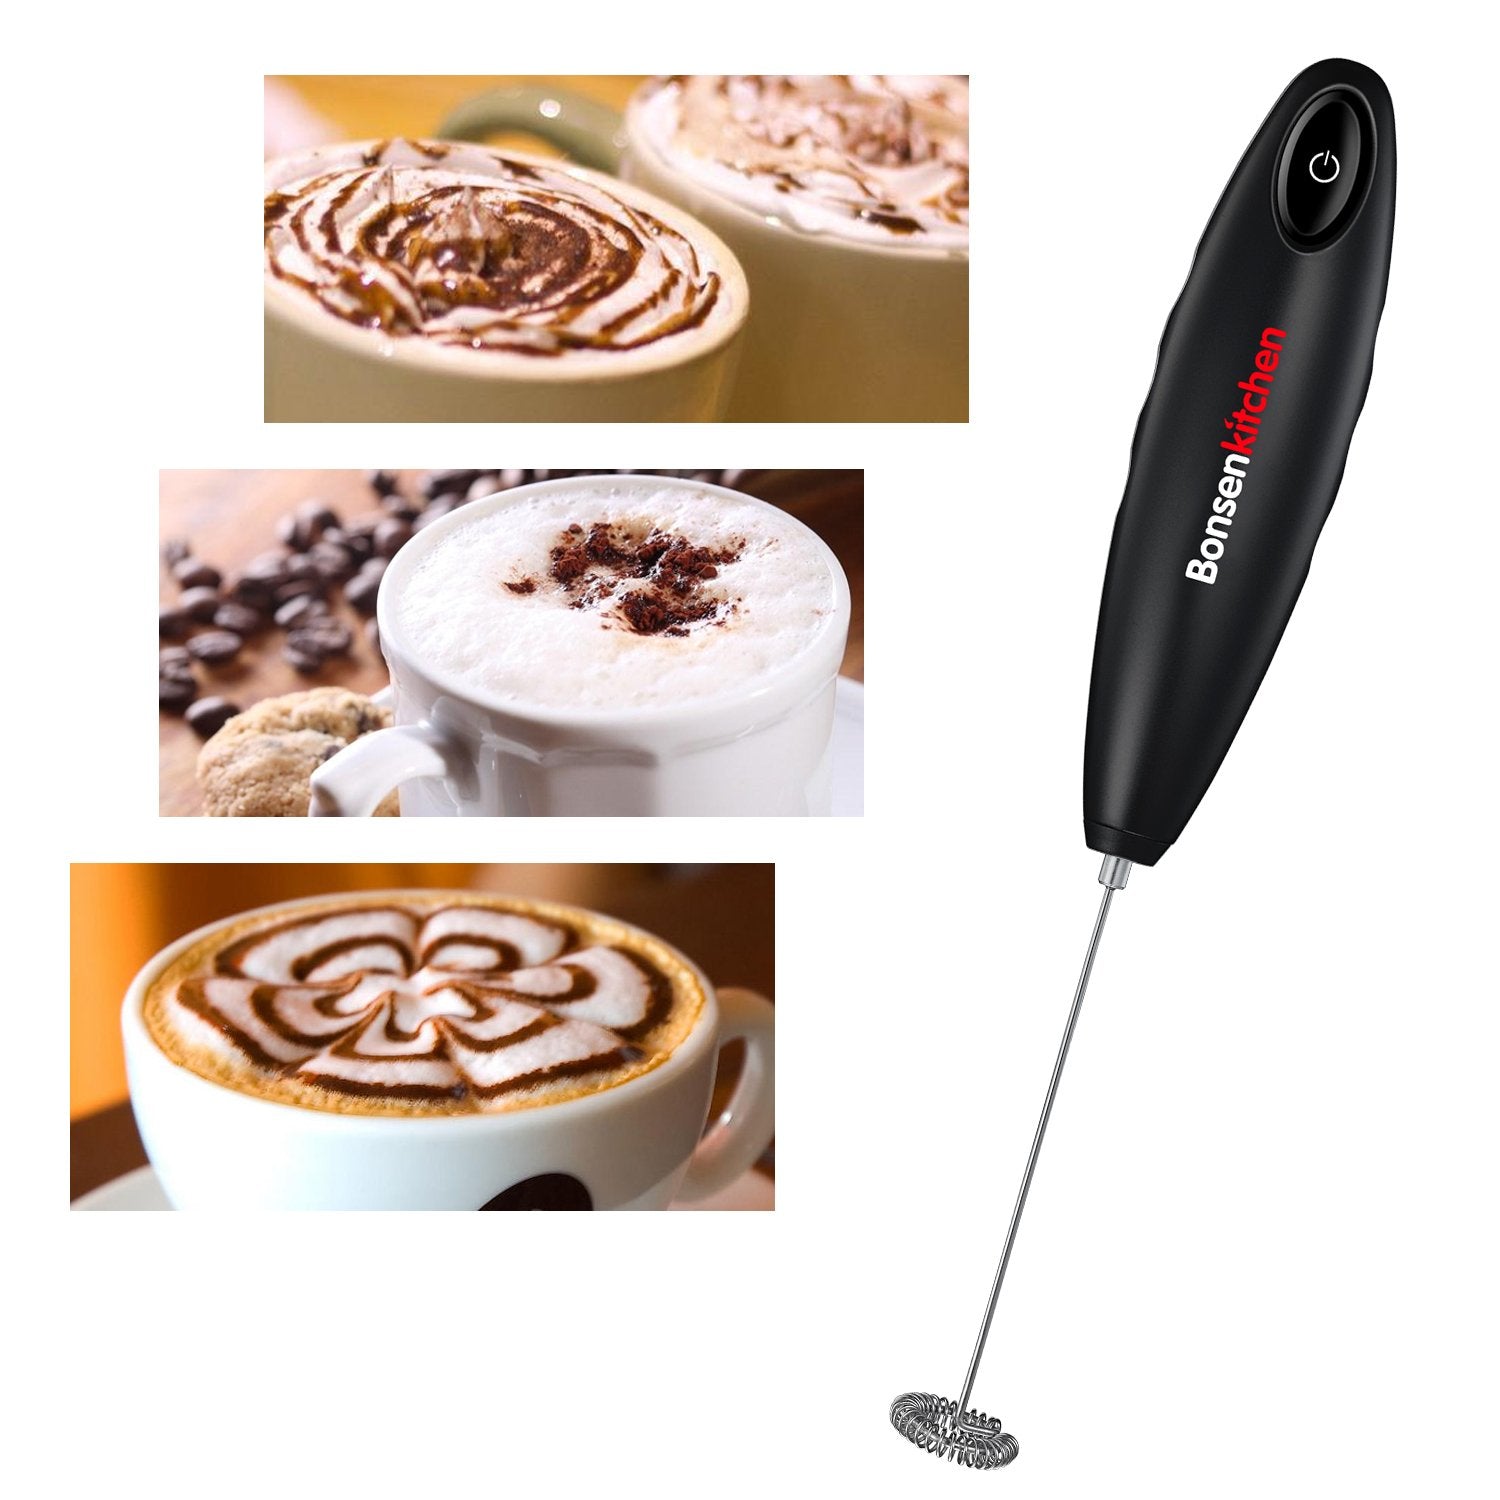 Bonsenkitchen Handheld Milk Frother Electric Hand Foamer Blender for Drink Mixer Perfect for Bulletproof Coffee Matcha Hot Chocolate Mini Battery